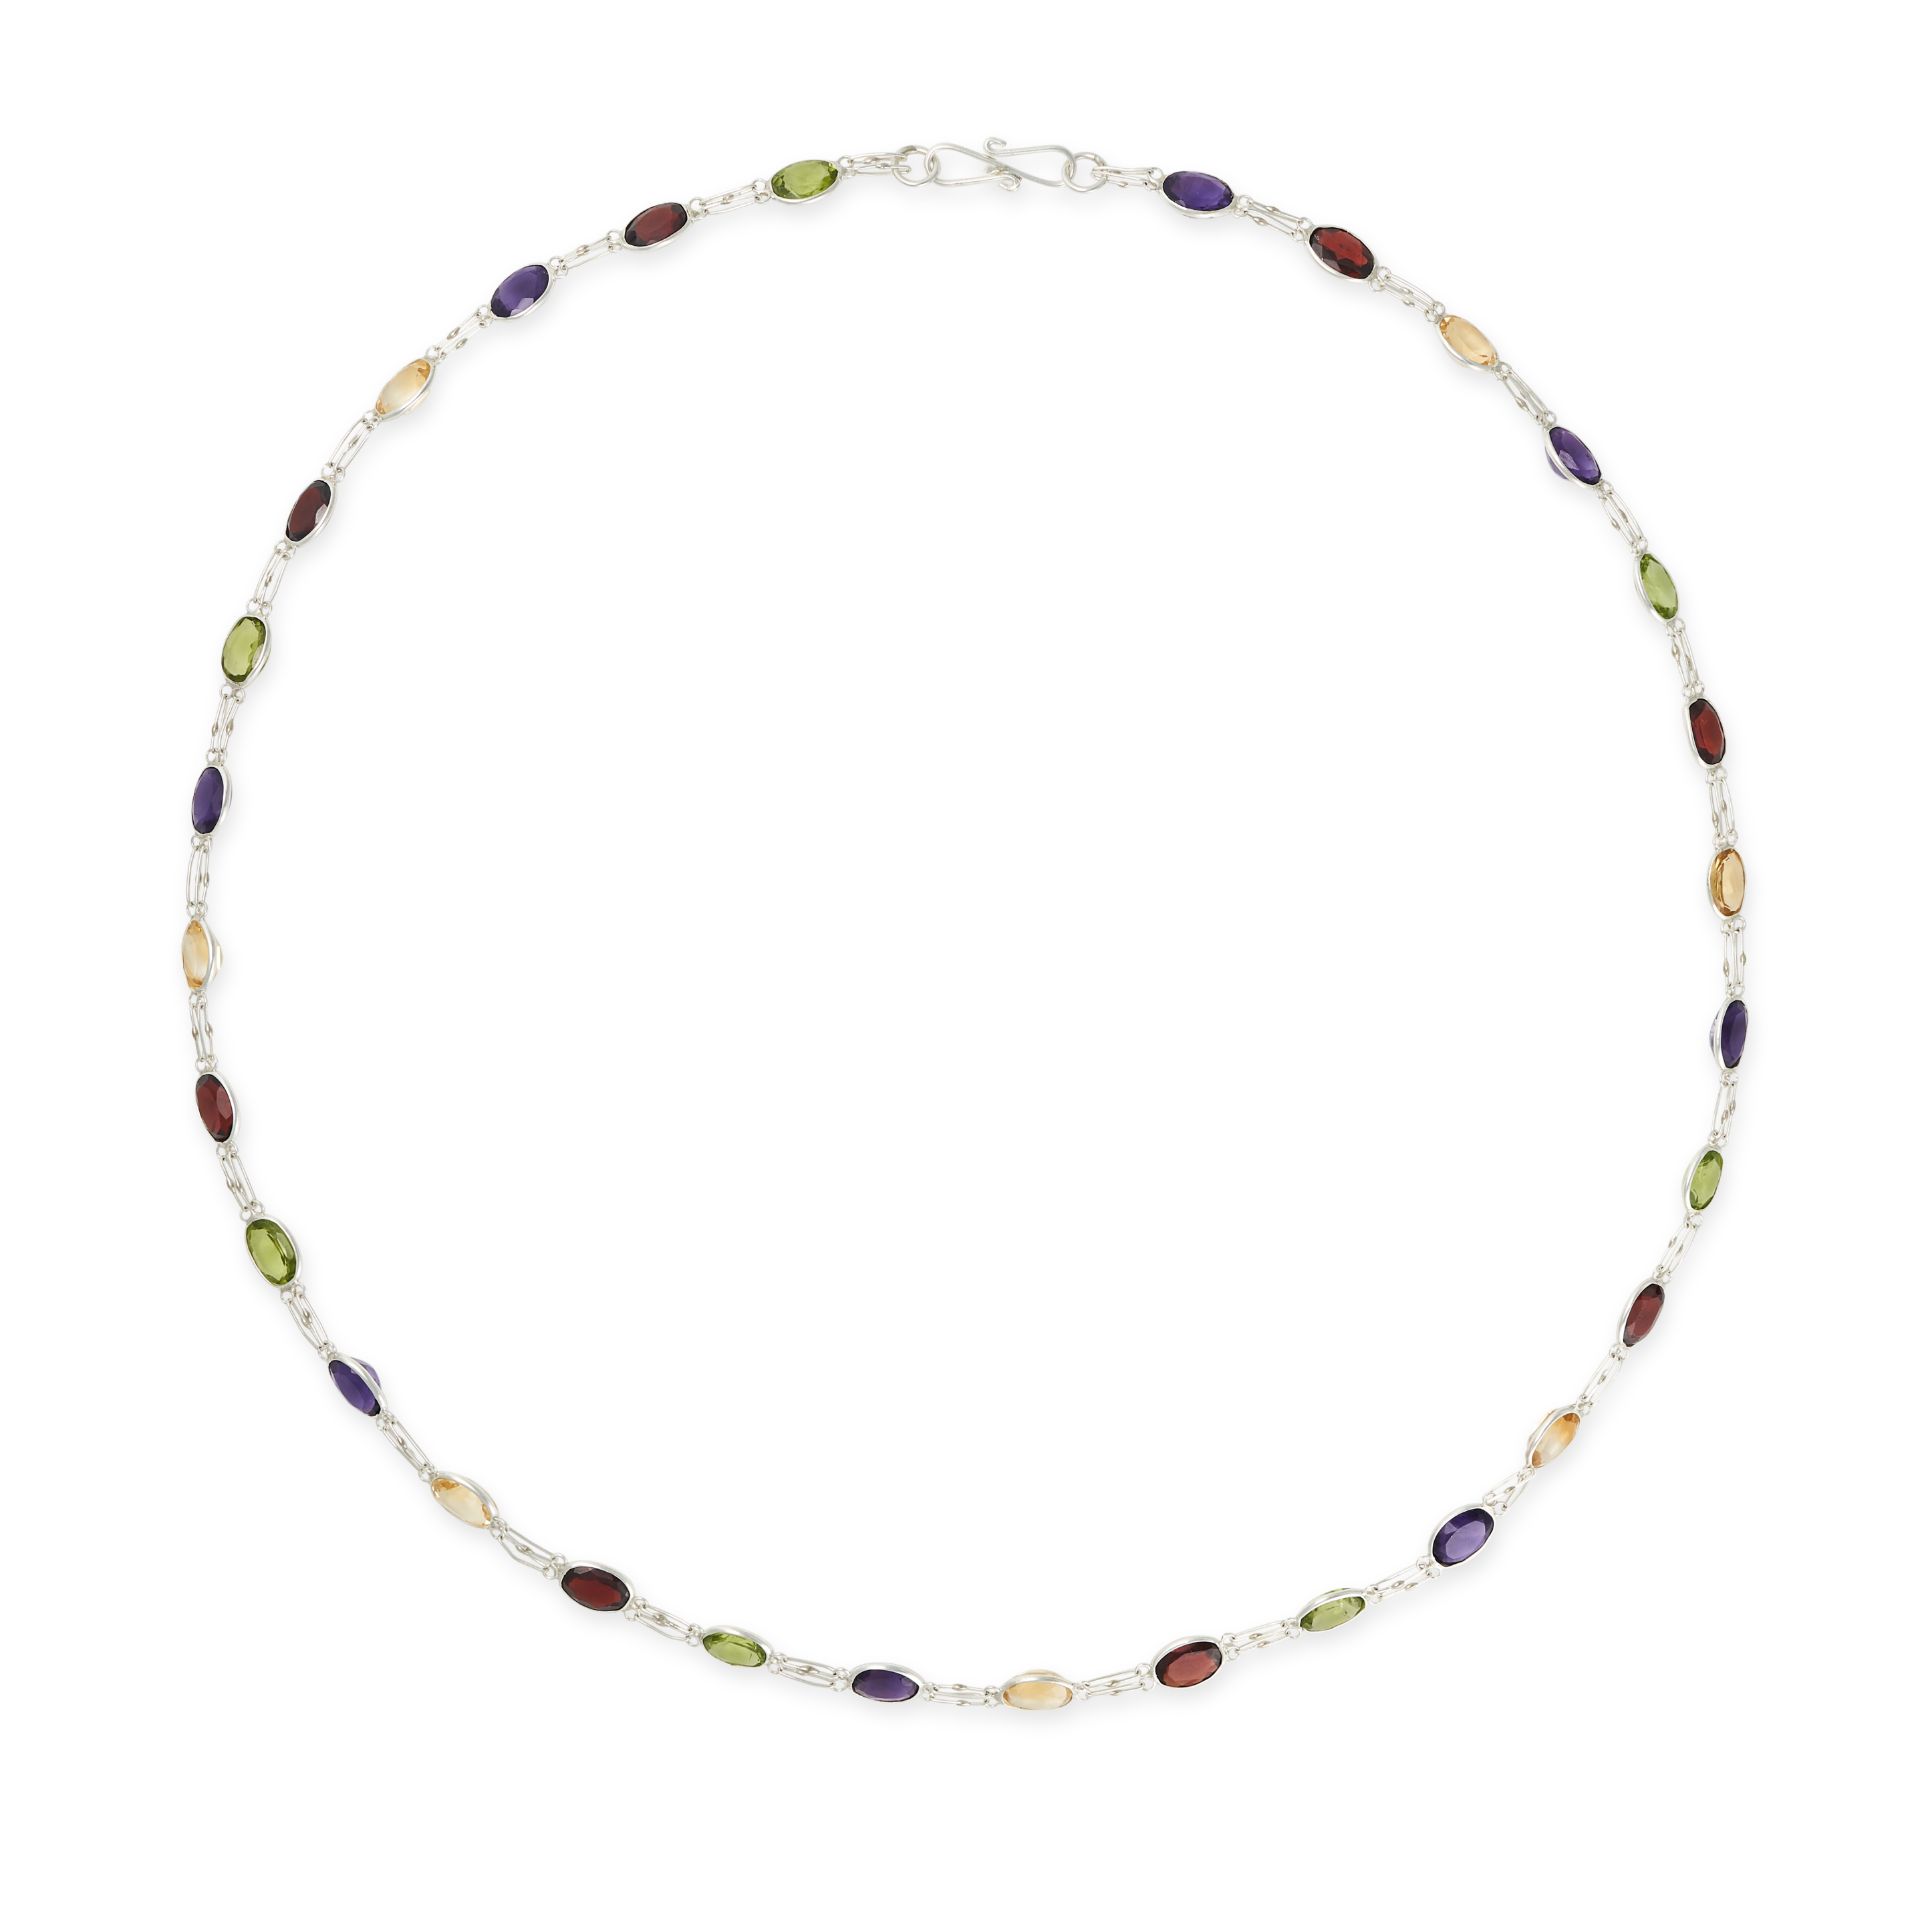 A MULTIGEM CHAIN NECKLACE in silver, set with oval cut garnets, amethyst, peridot and citrine on ...